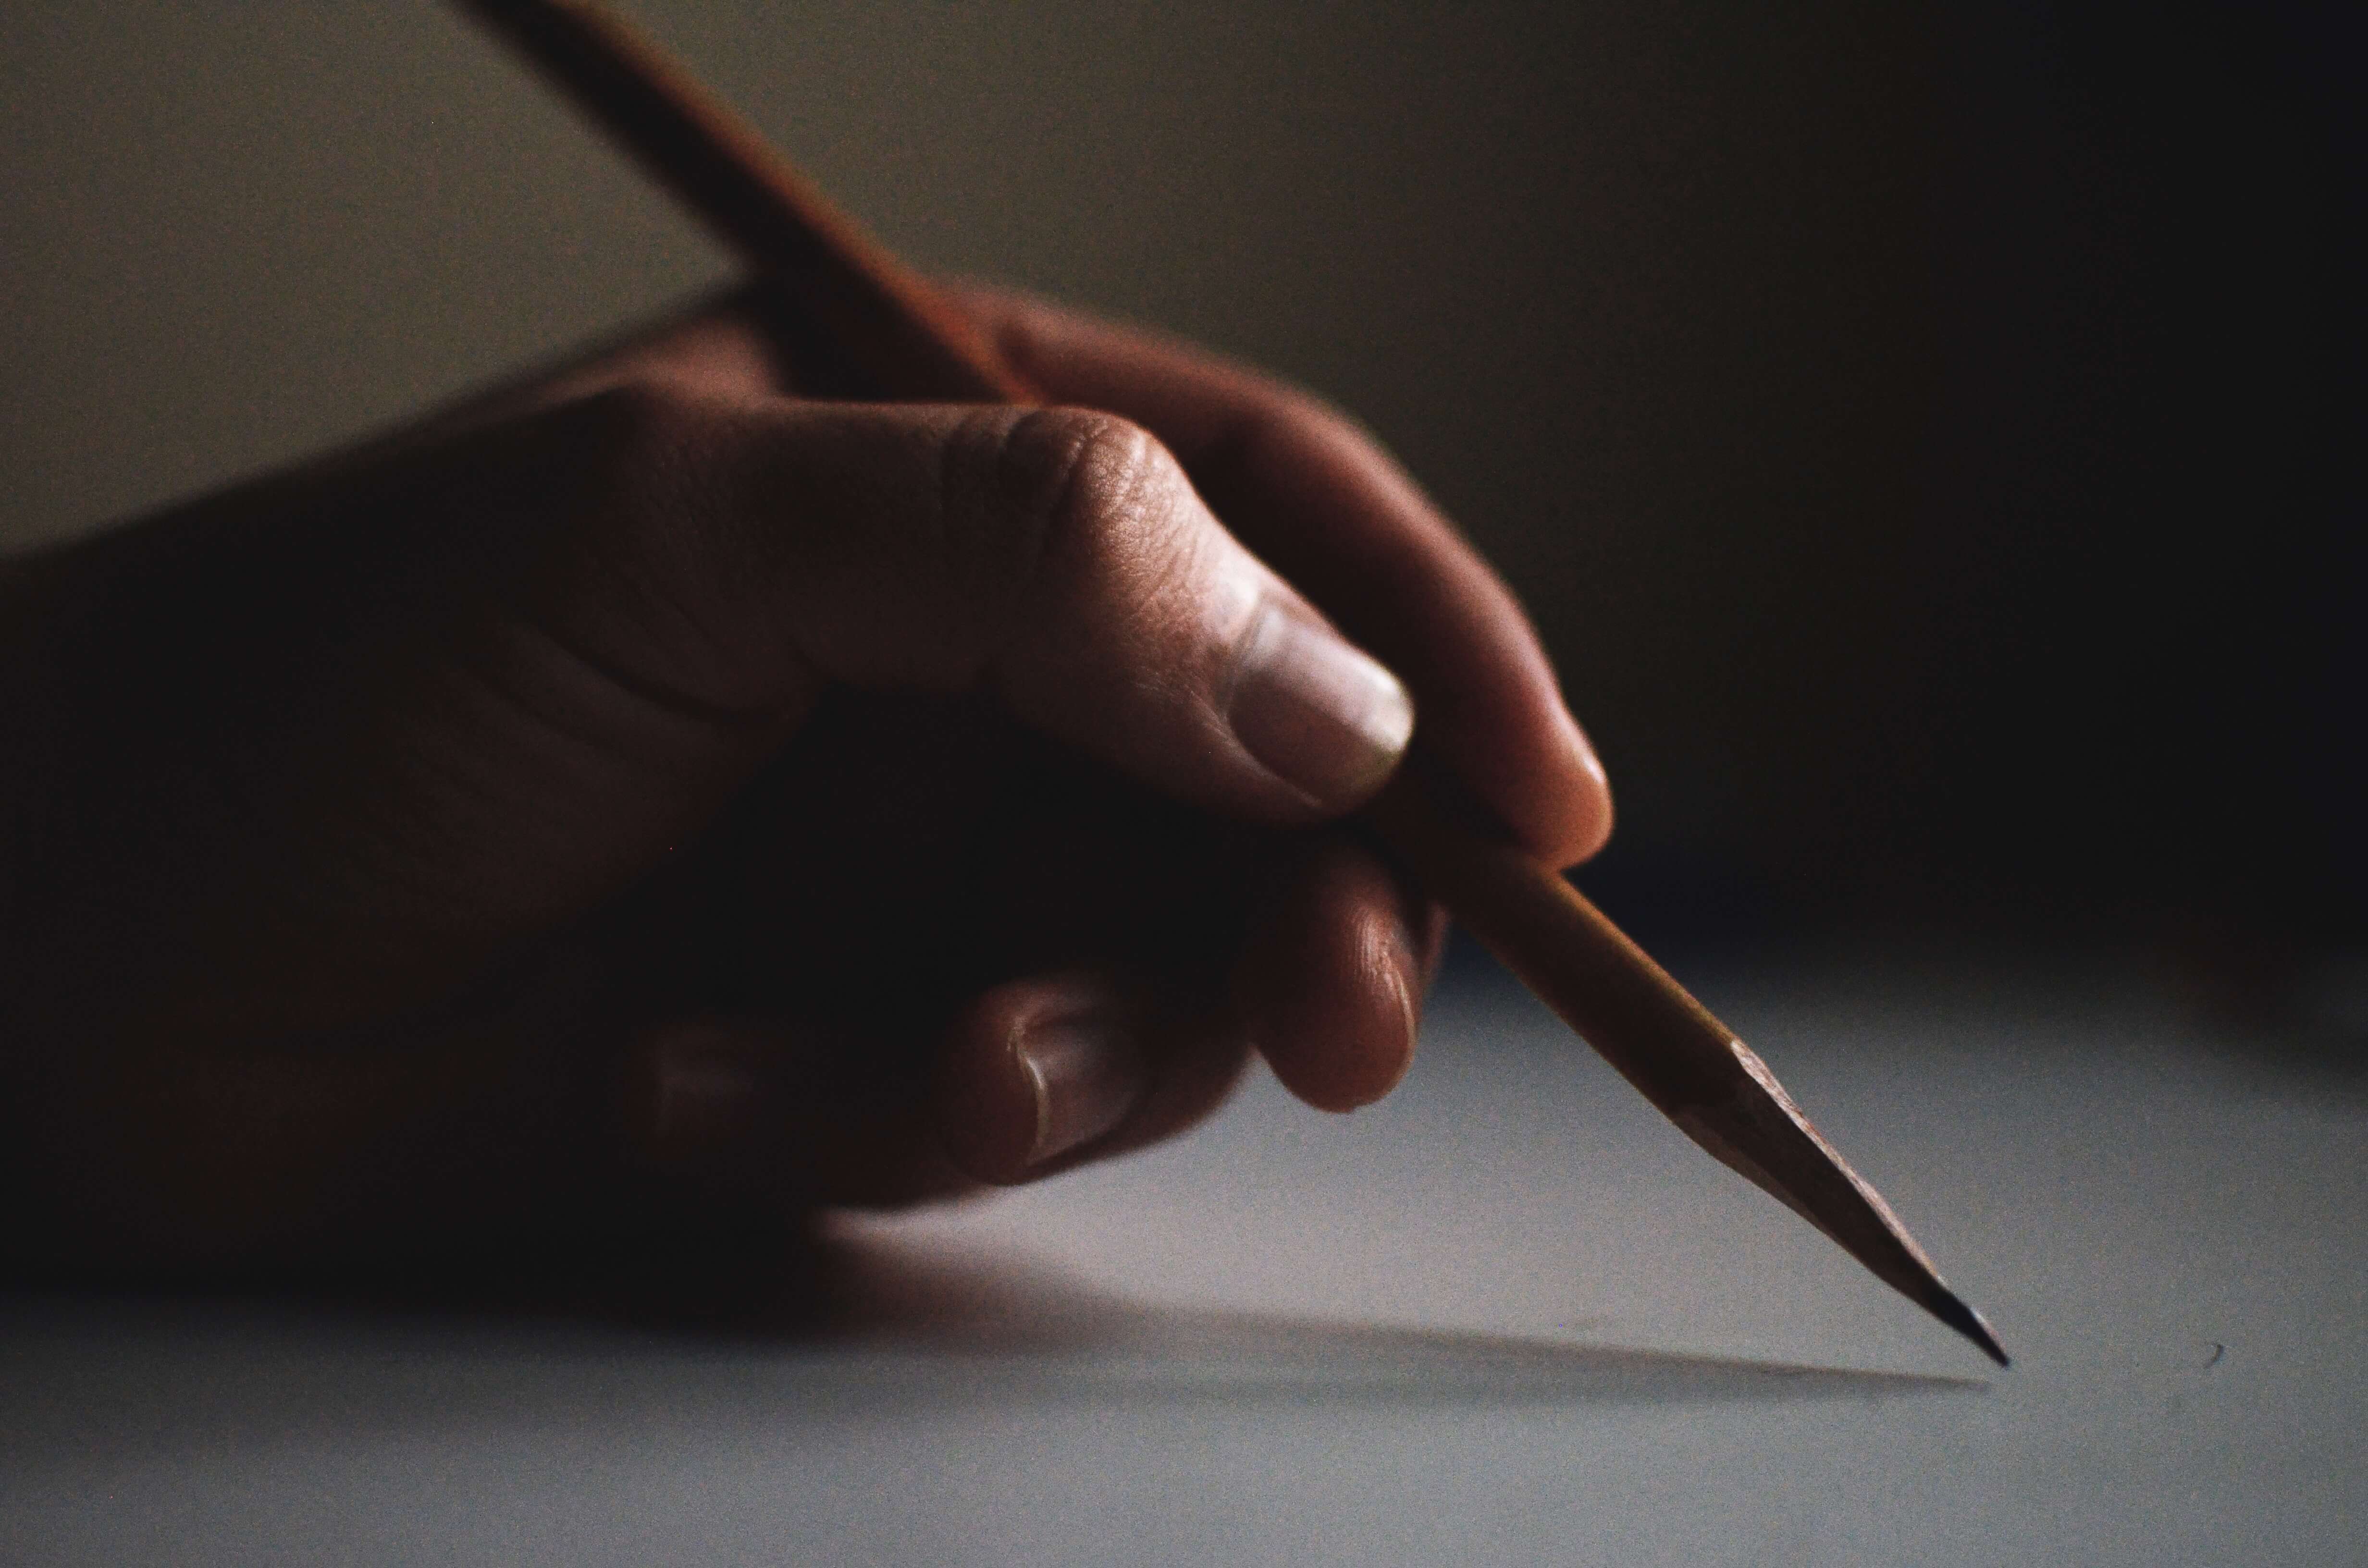 A close-up of a hand writing with a pencil